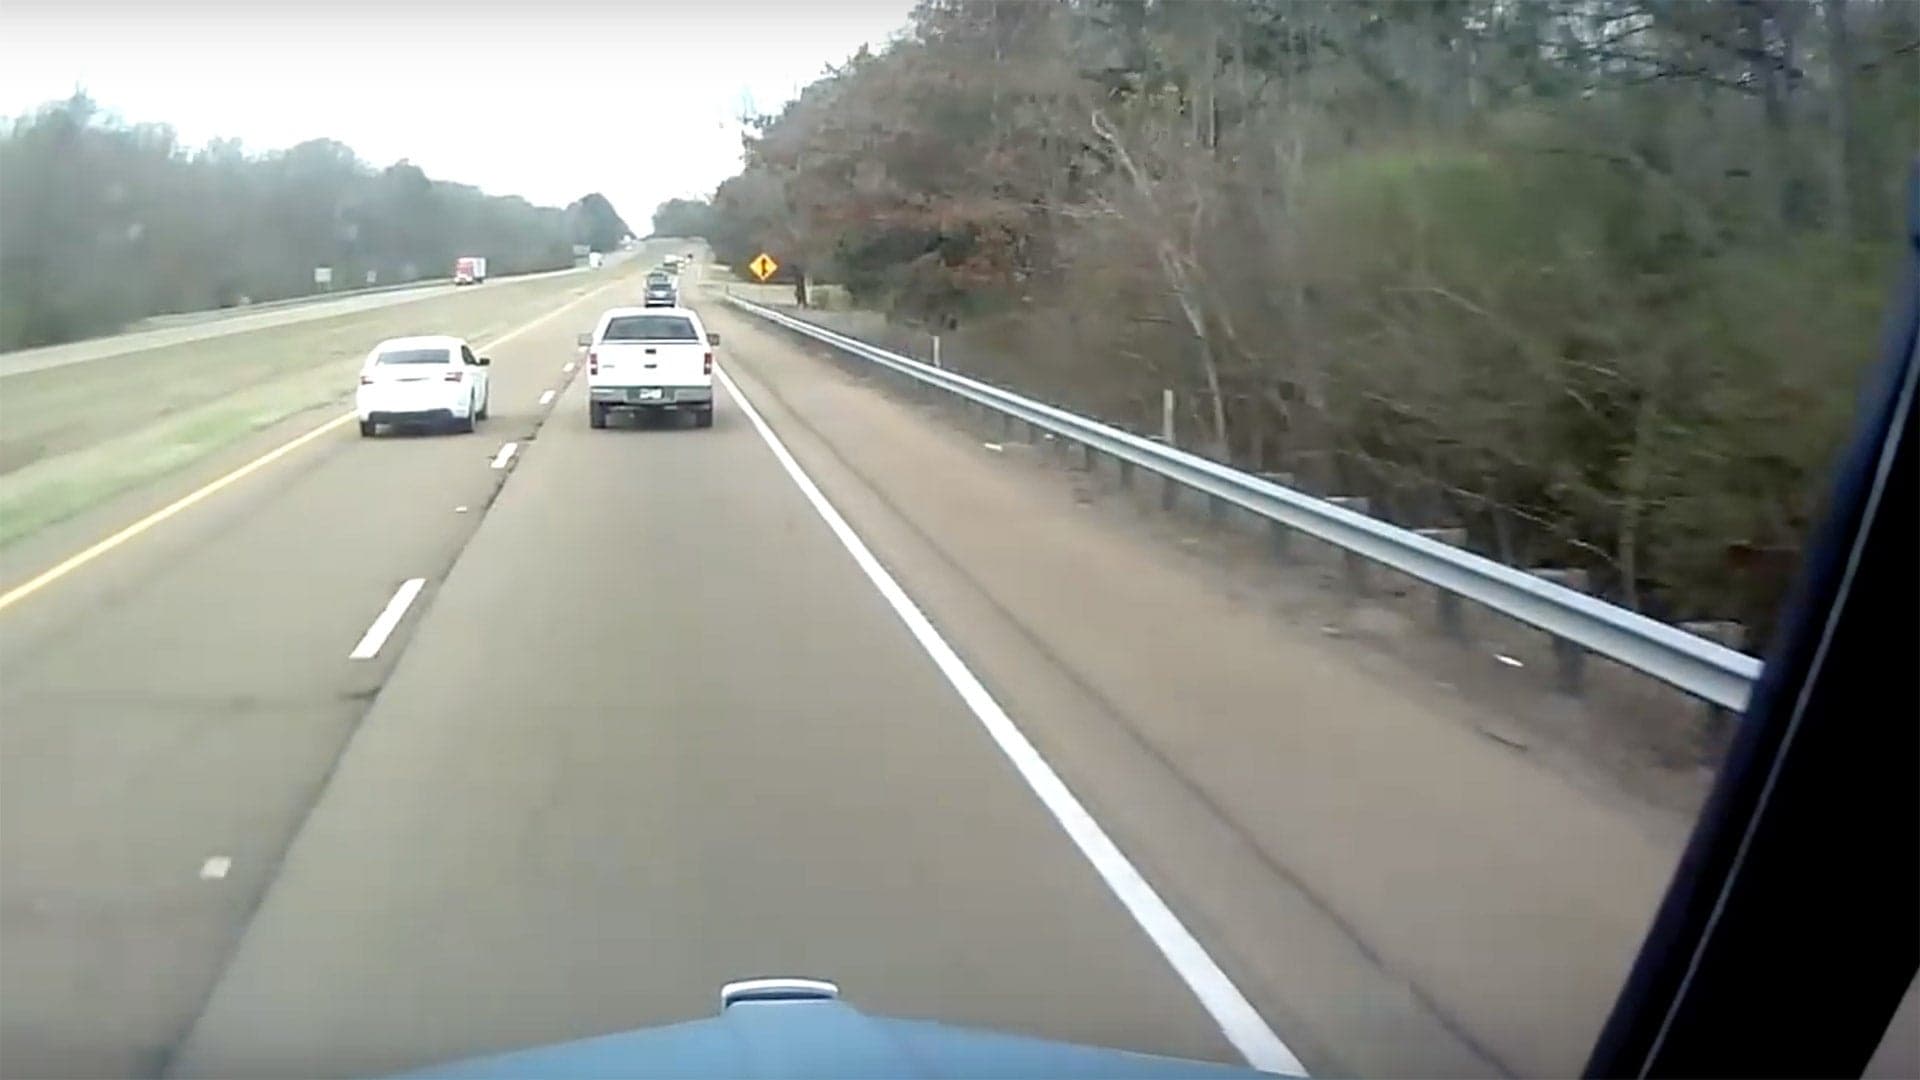 Ford F-150-on-Chrysler 200 Road Rage Video Ends Poorly for the Smaller Car